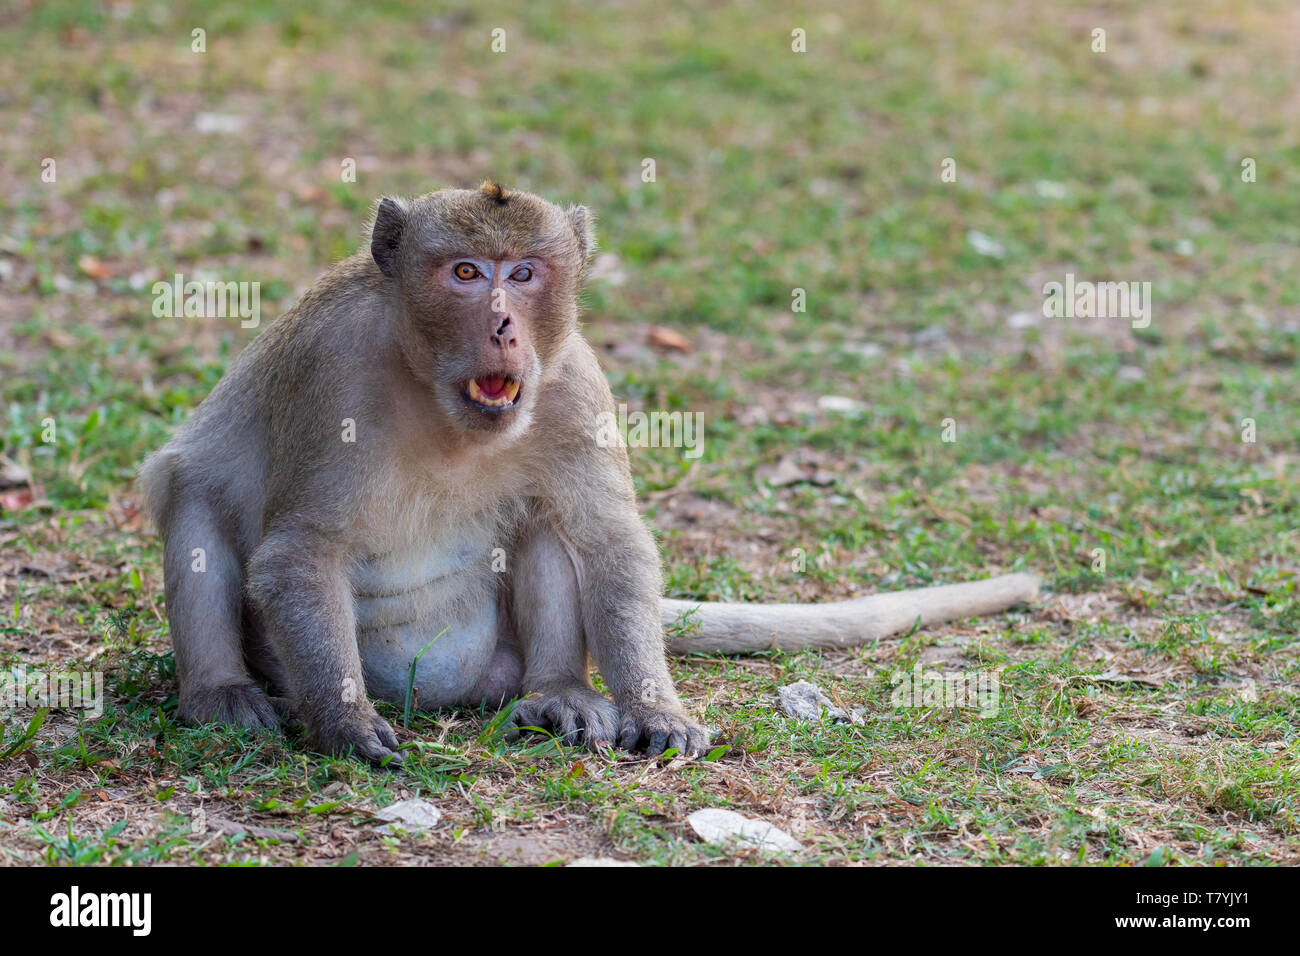 Anziani obesi macaco Long-Tailed con cicatrici del viso a Angkor Wat in Siem Reap, Cambogia Foto Stock